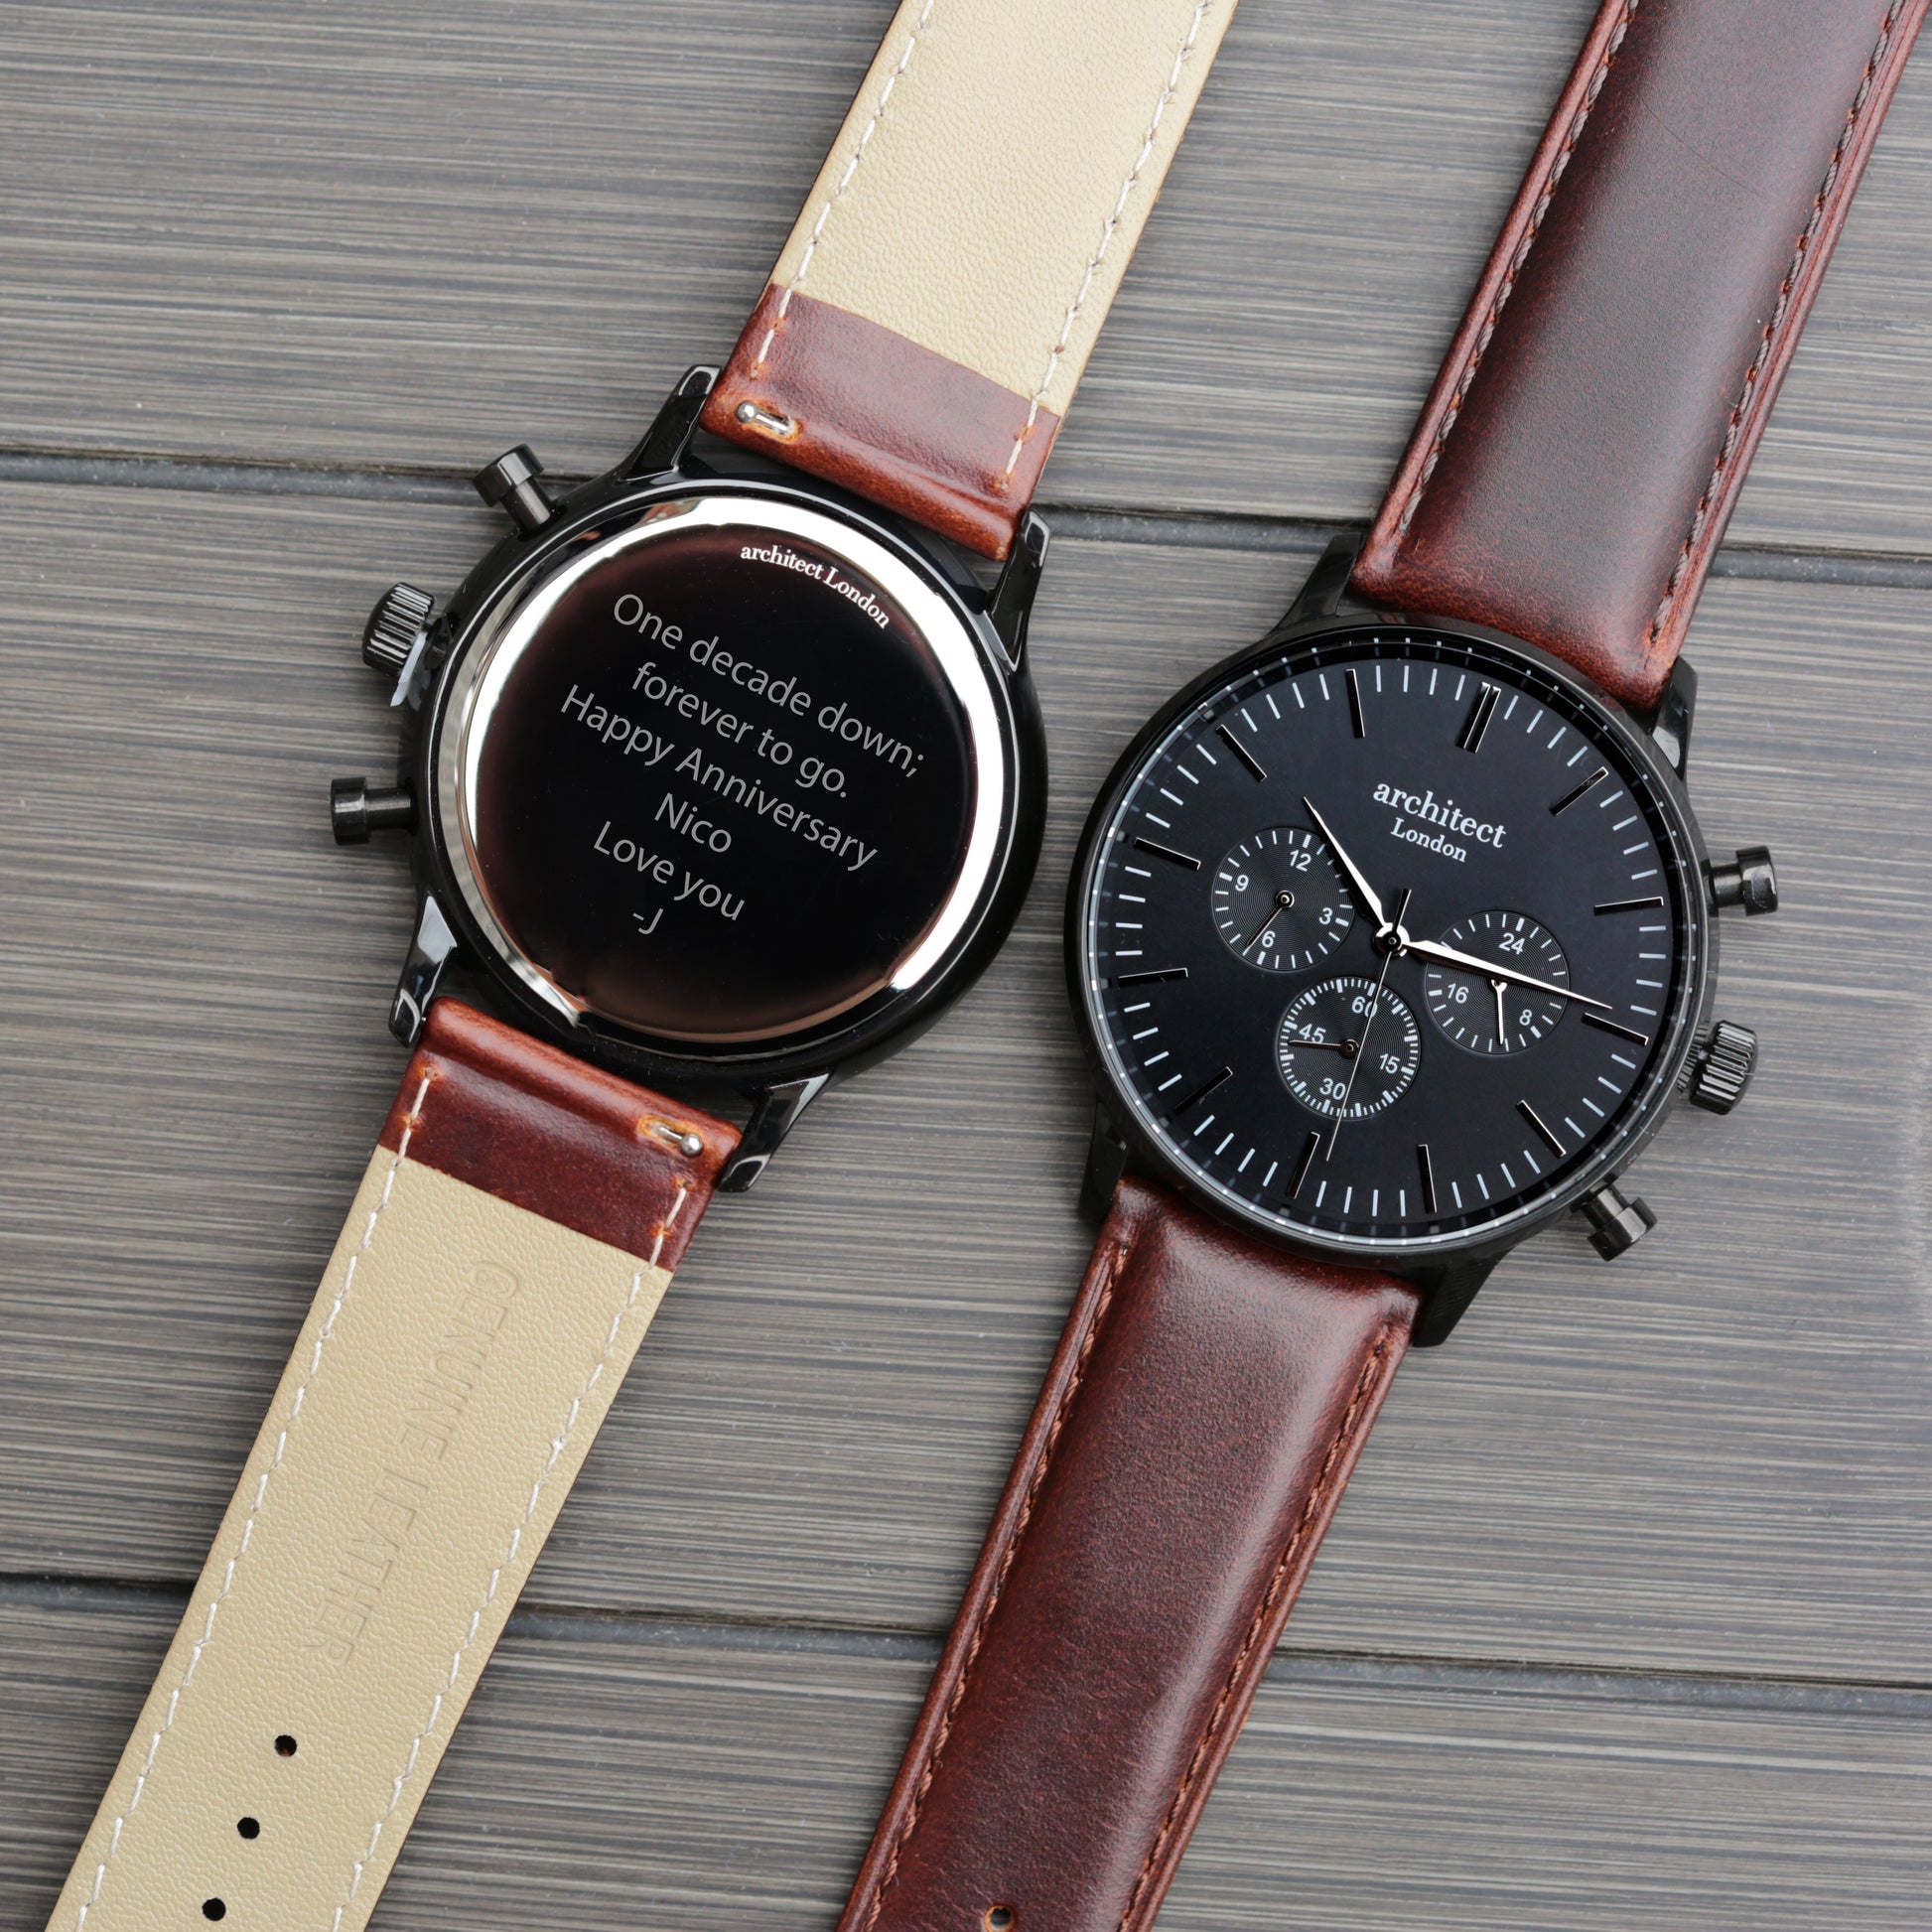 Personalized Men's Watches - Men's Architect Personalized Watch In Black Face Walnut 